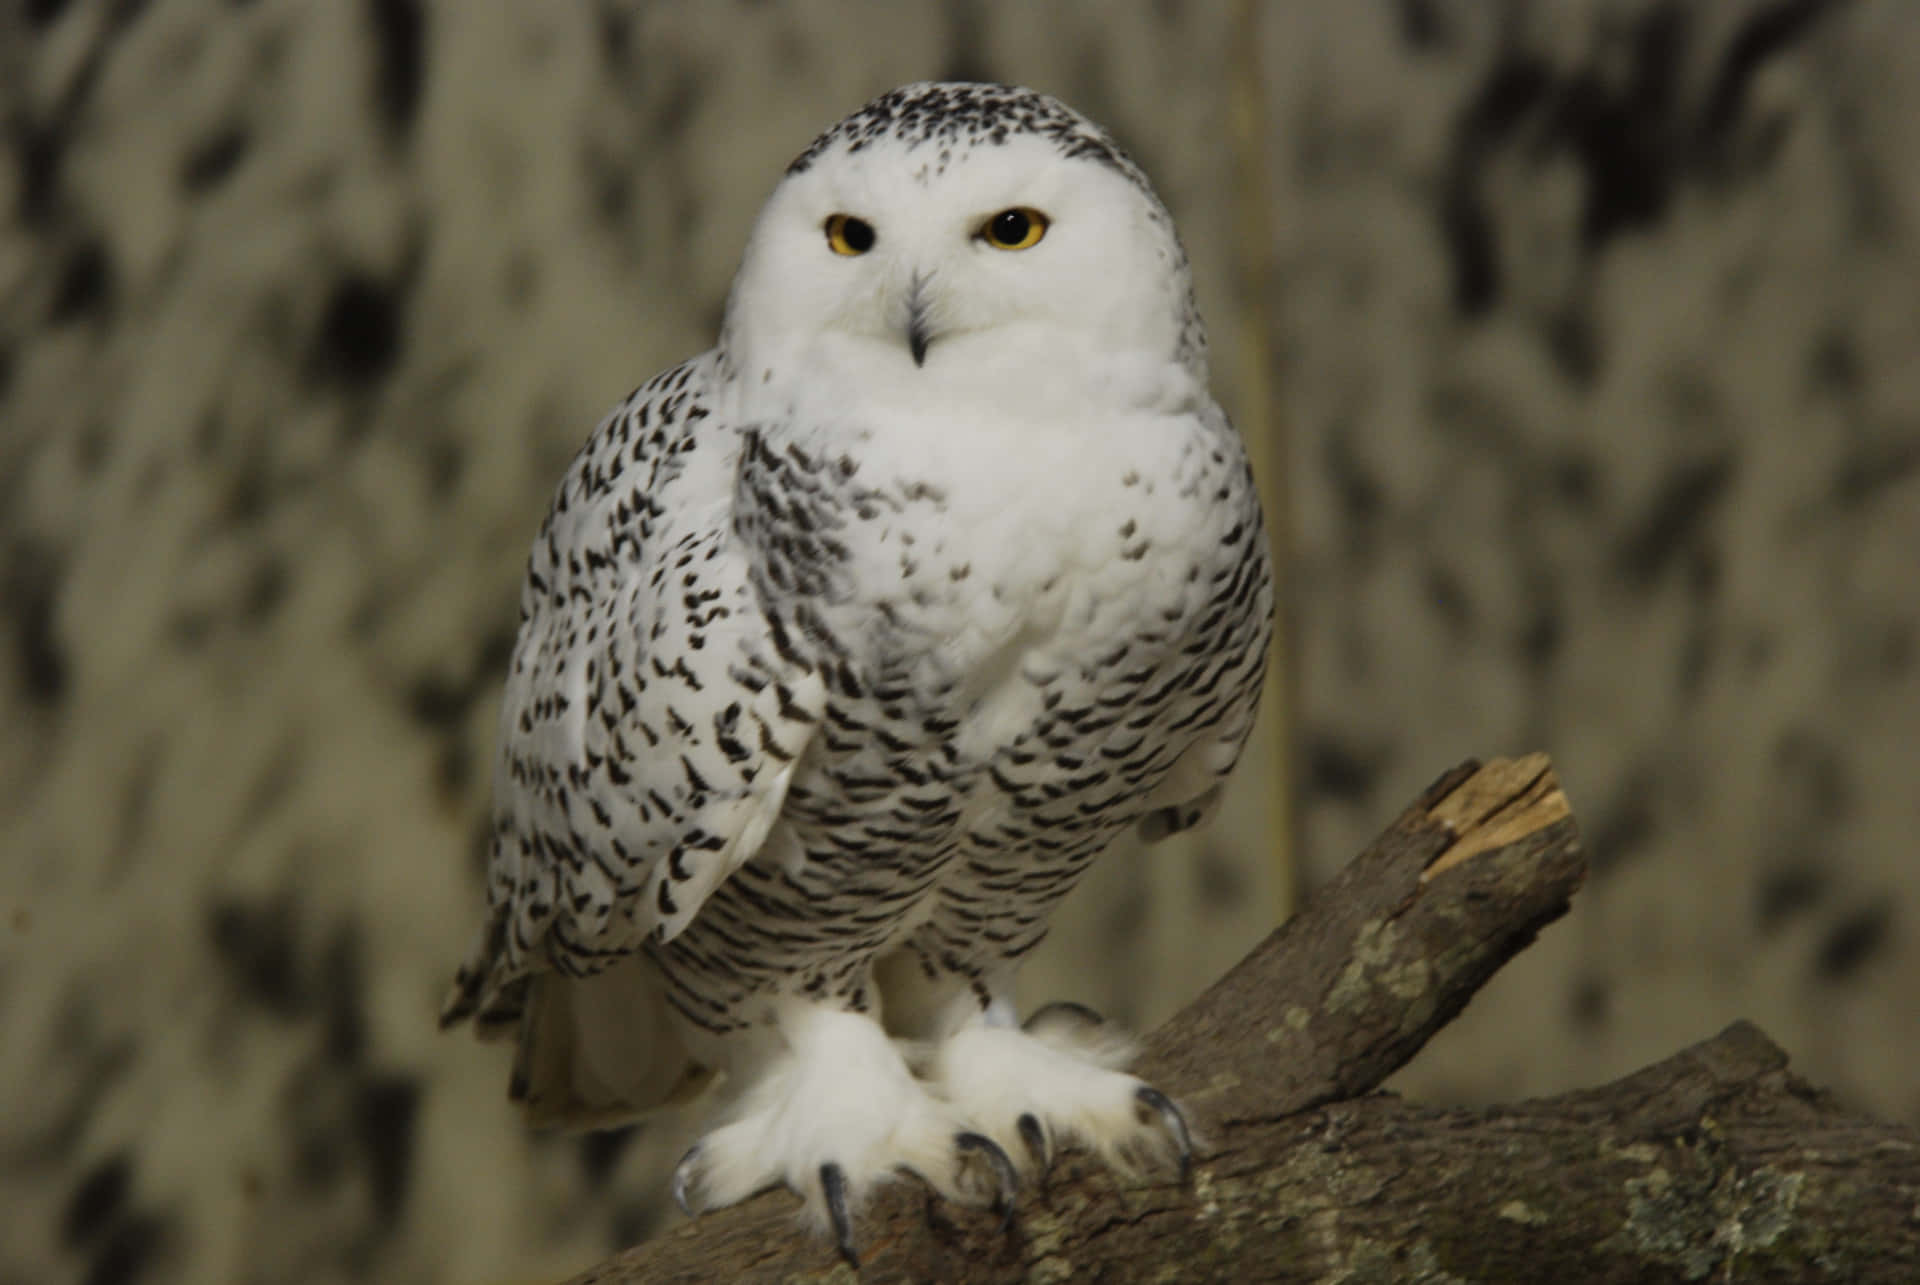 A Beautiful Snowy Owl Resting in the Wild